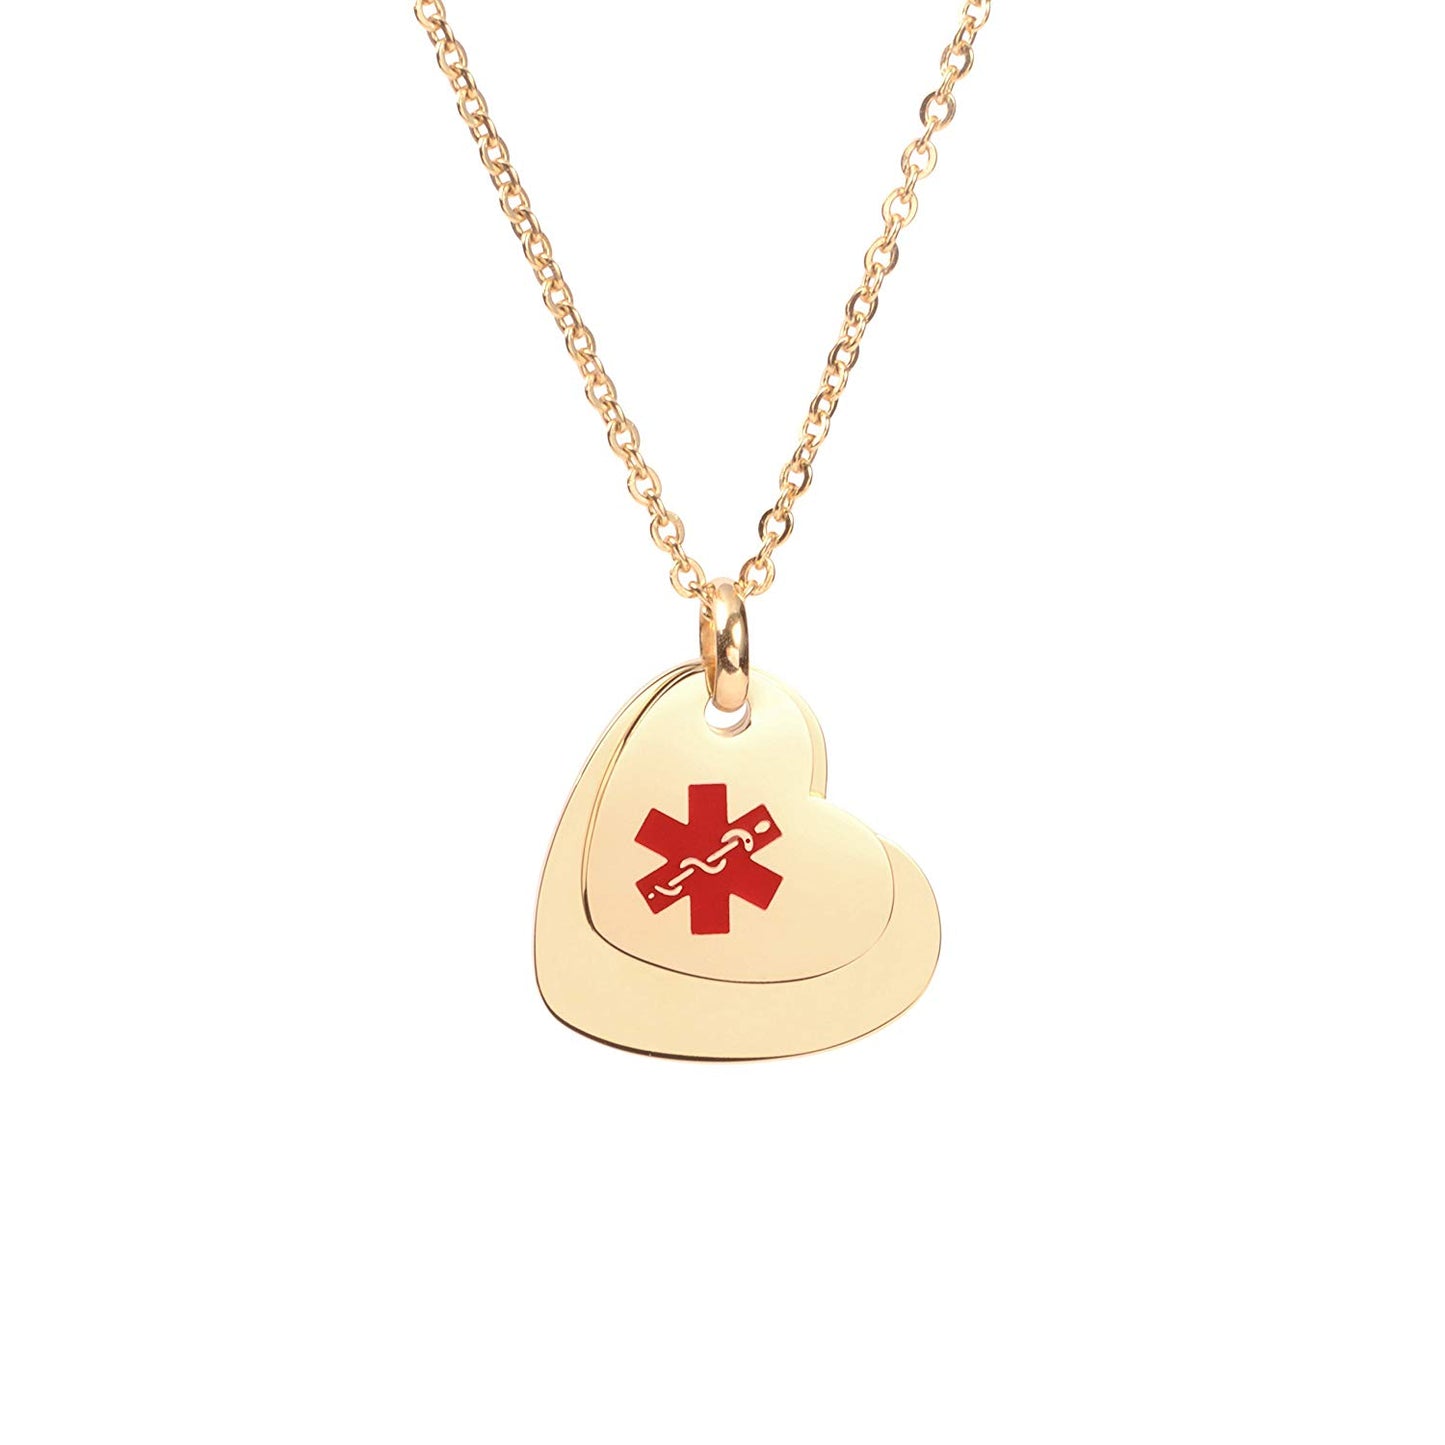 Heart Medical ID Alert Necklaces for Women & Girl with Free Engraving